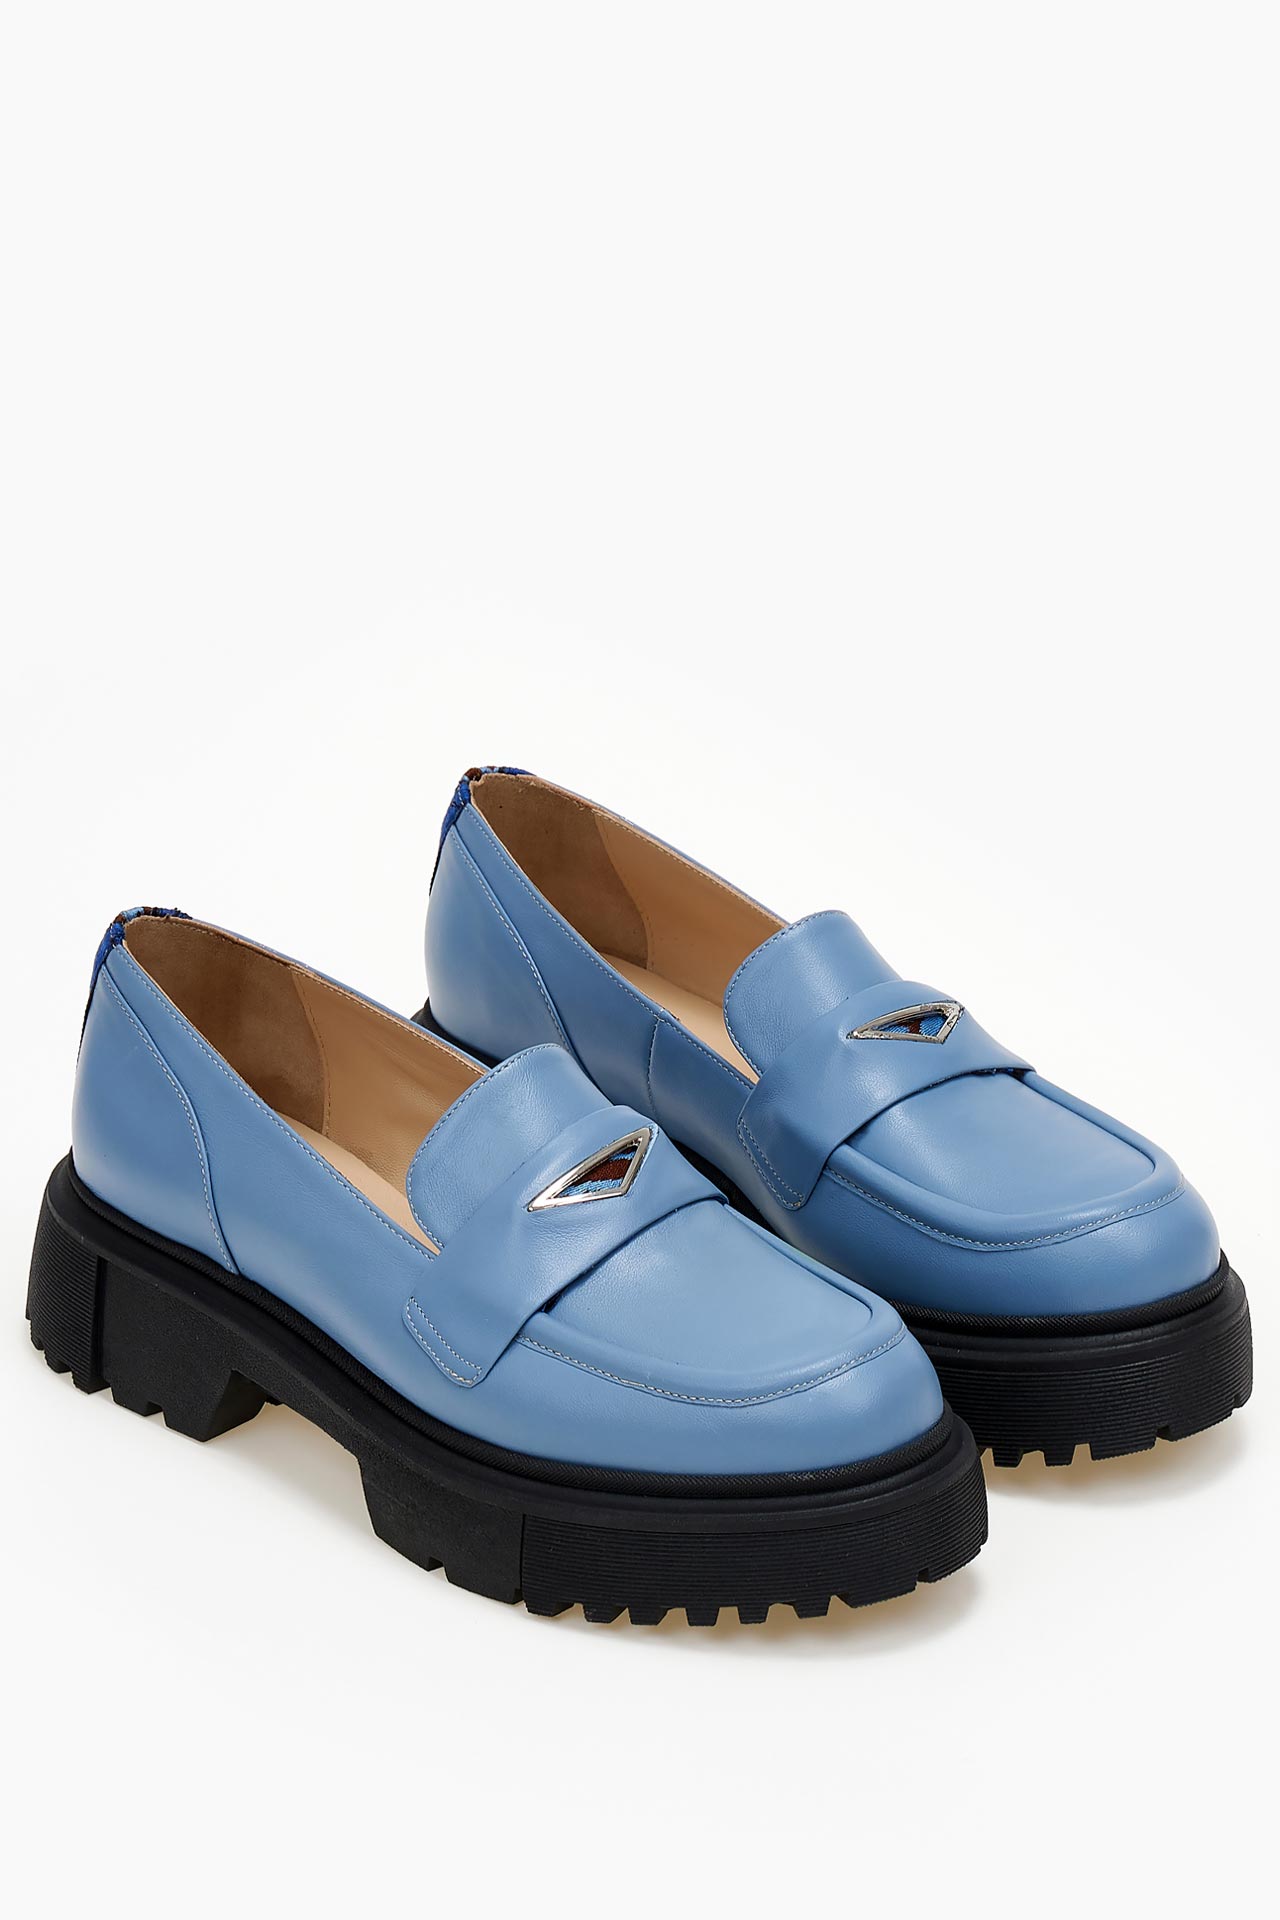 DORE LIGHT BLUE LEATHER LOAFERS